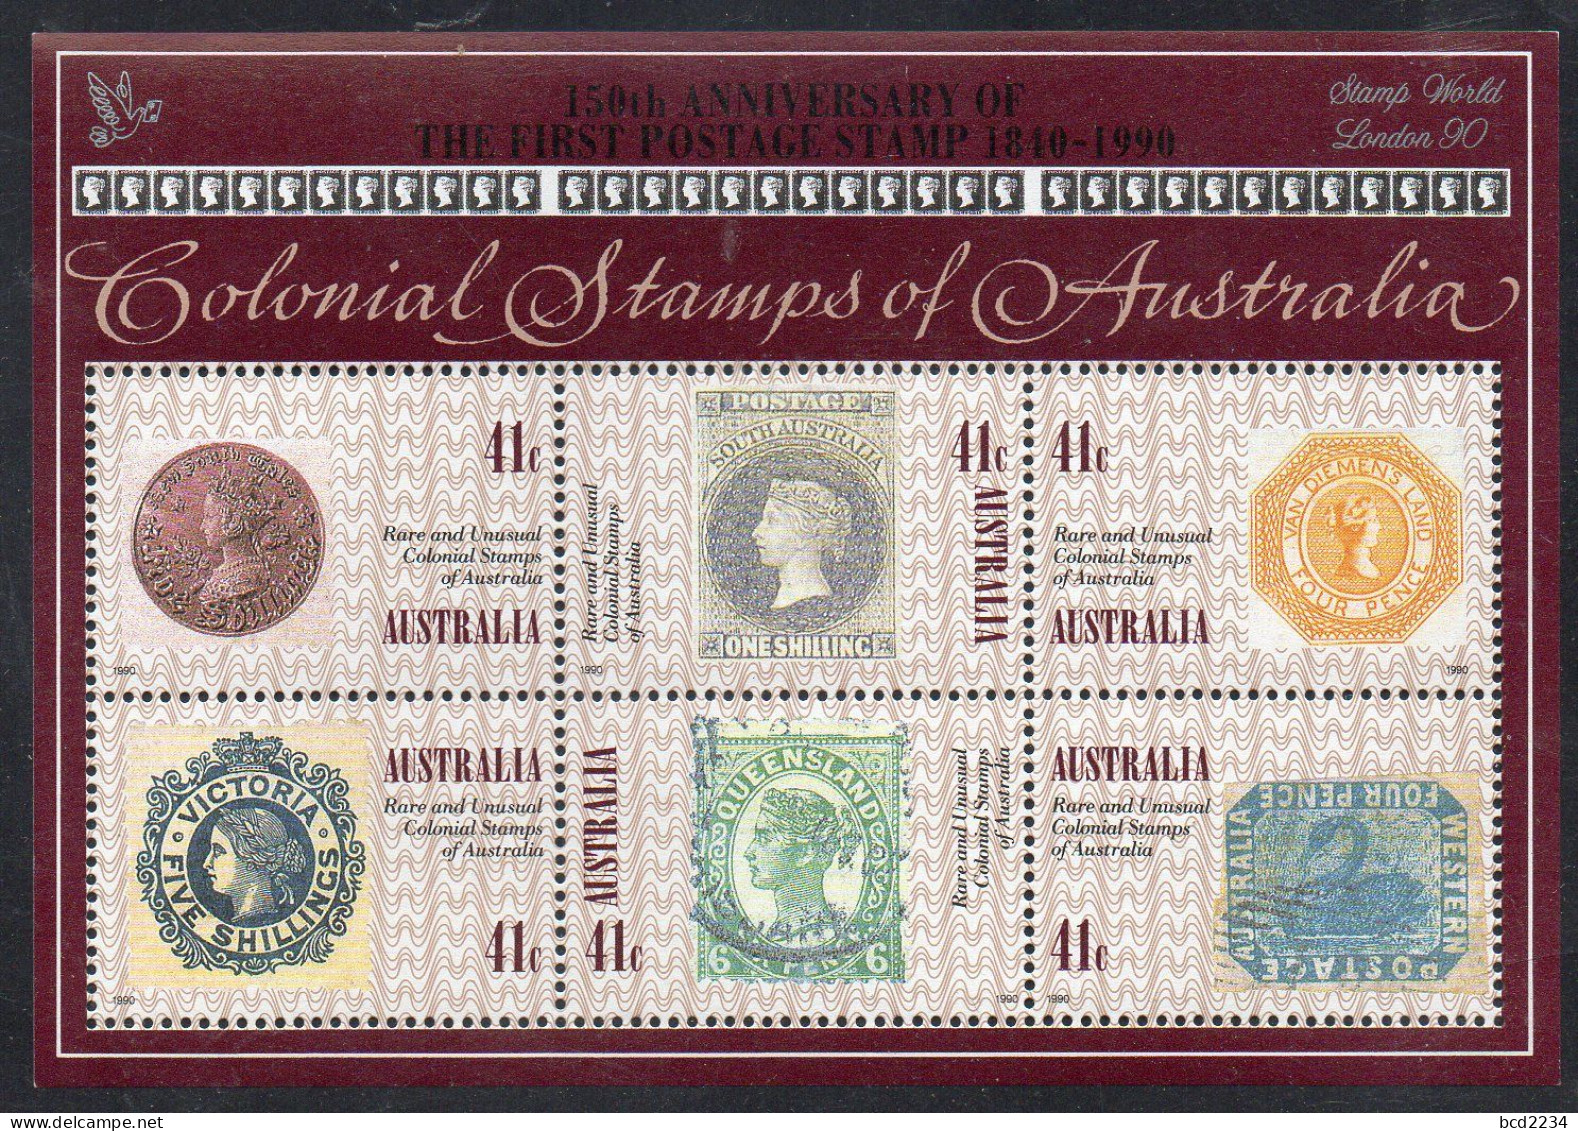 AUSTRALIA 1990 RARE & UNUSUAL COLONIAL STAMPS + SILVER STAMP WORLD LONDON 90 OVERPRINT SG MS1253 Mi BL 10 MNH - Neufs